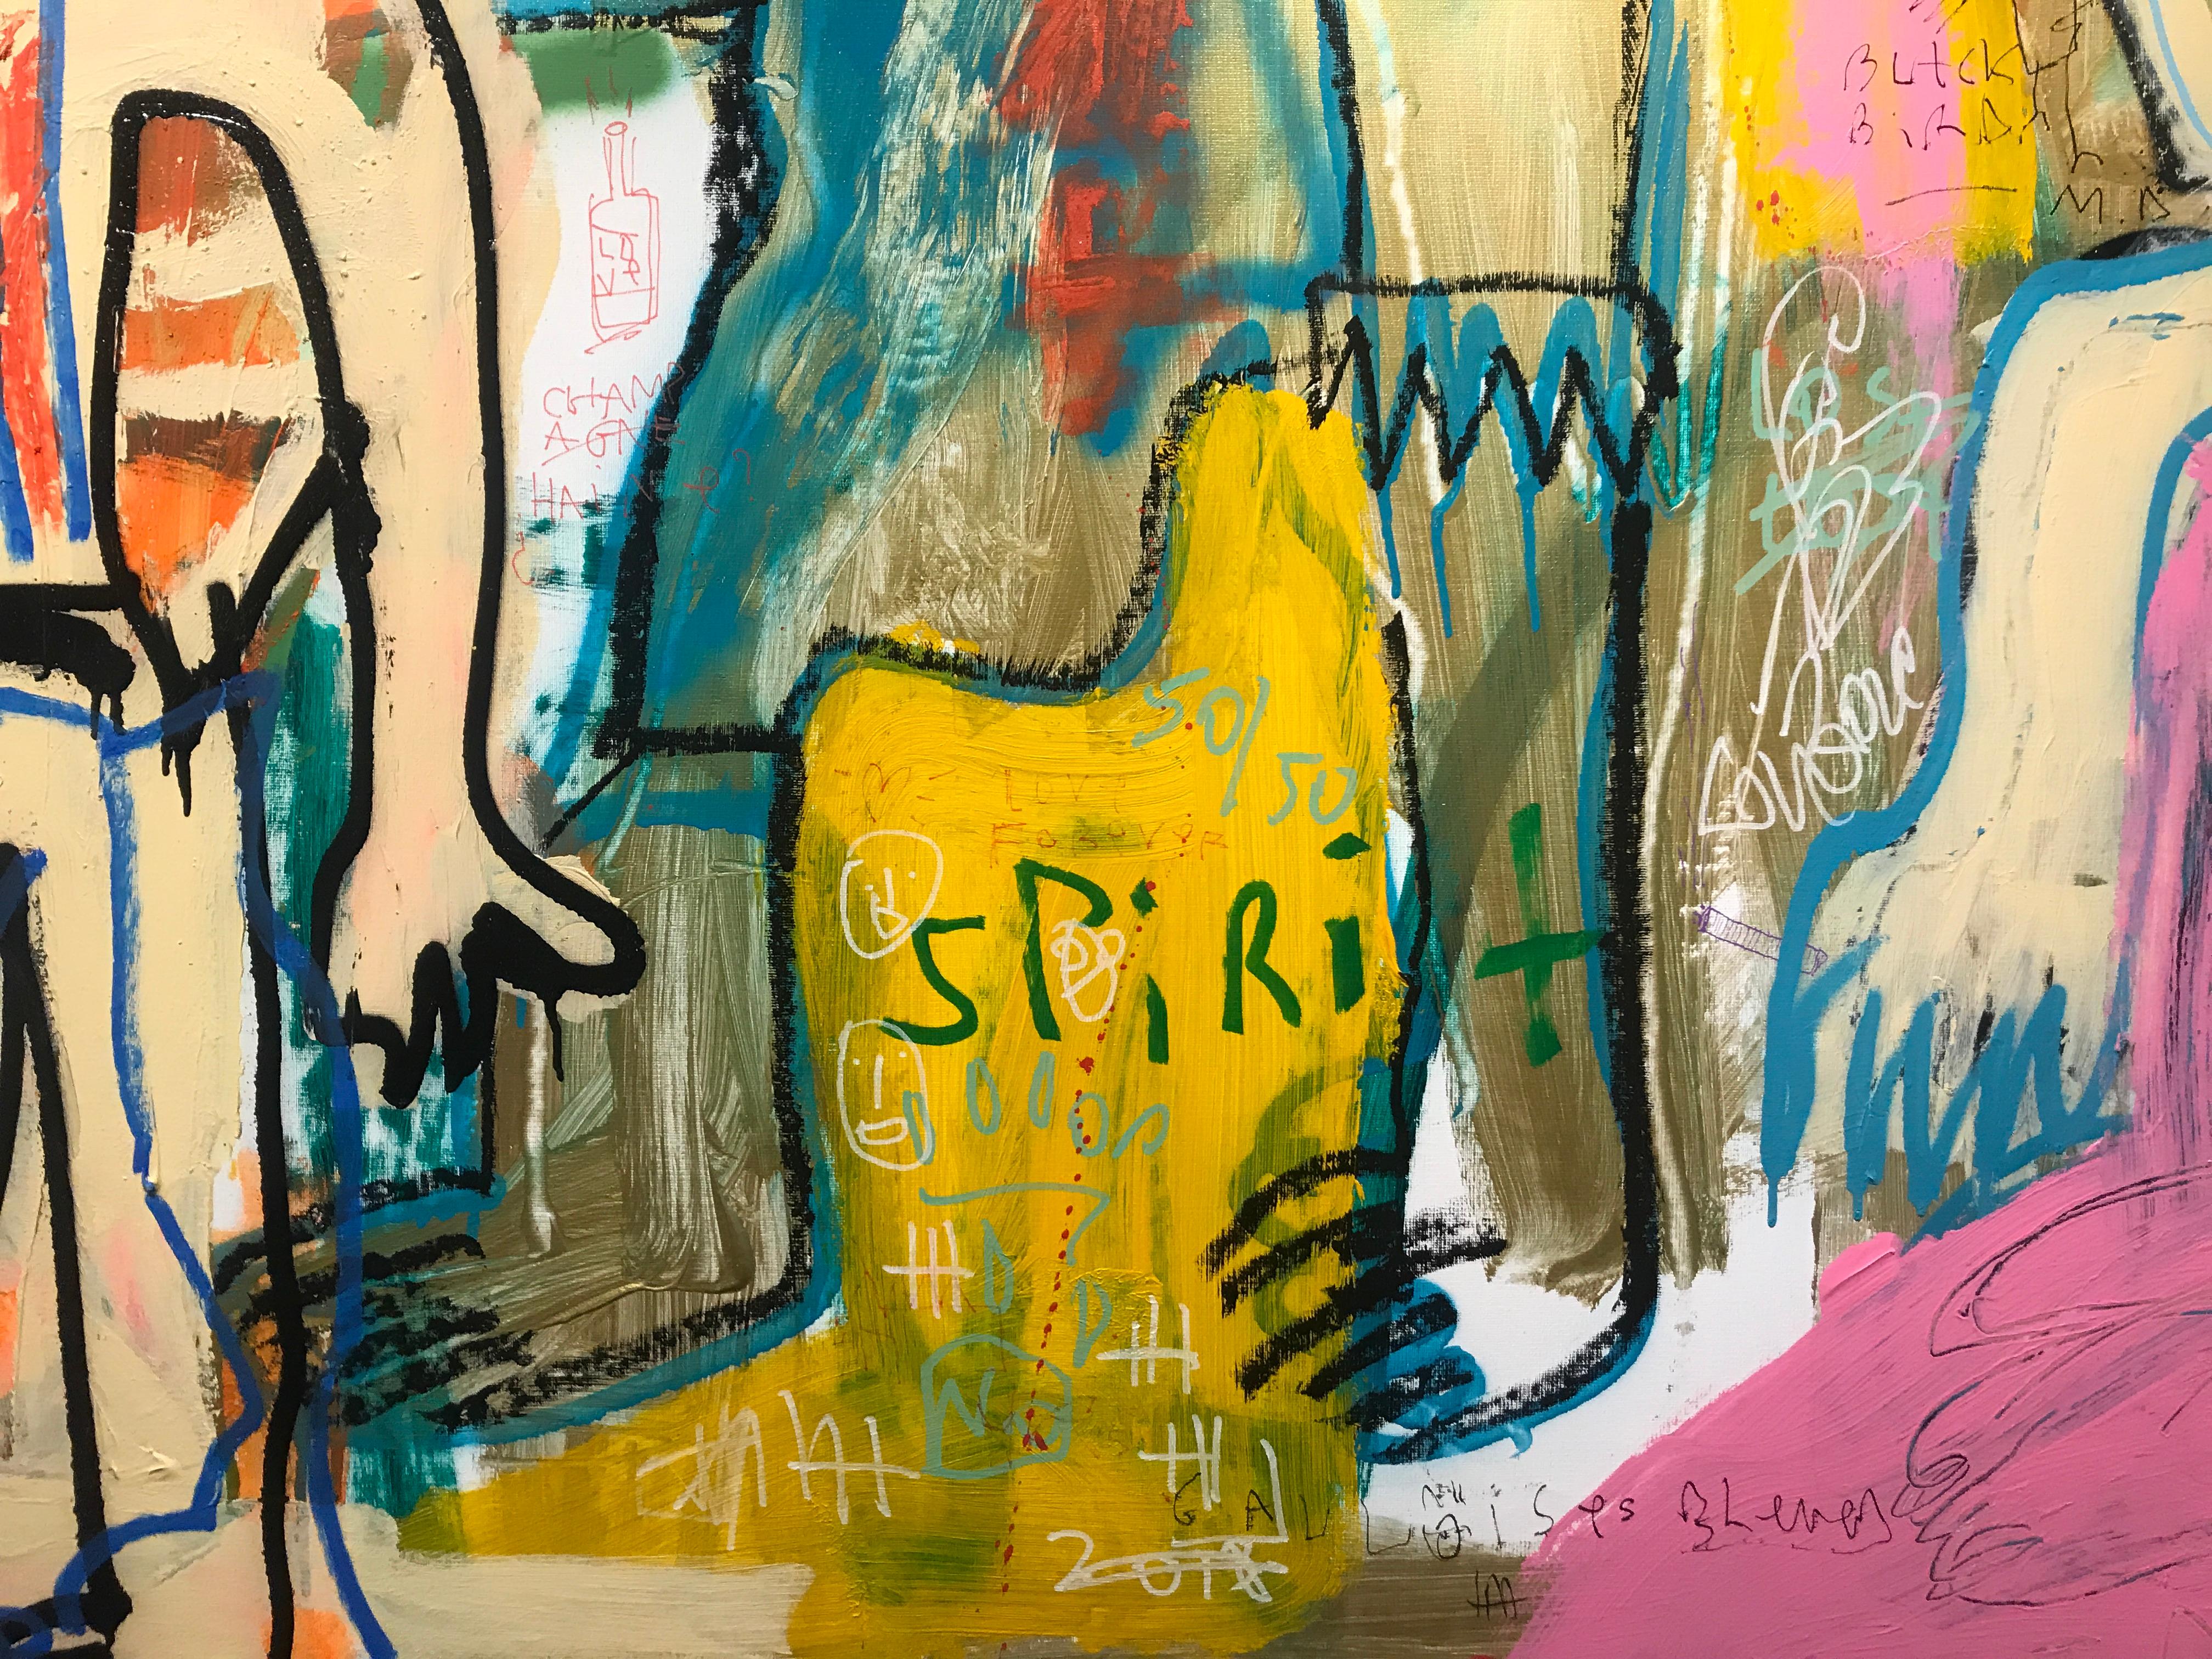 'Spirit' is a large contemporary figurative Art Brut mixed media on canvas painting created by French artist Jazzu in 2018. Featuring a vibrant palette made of pink, yellow, blue, cream and red among other colors, the painting strikes with its